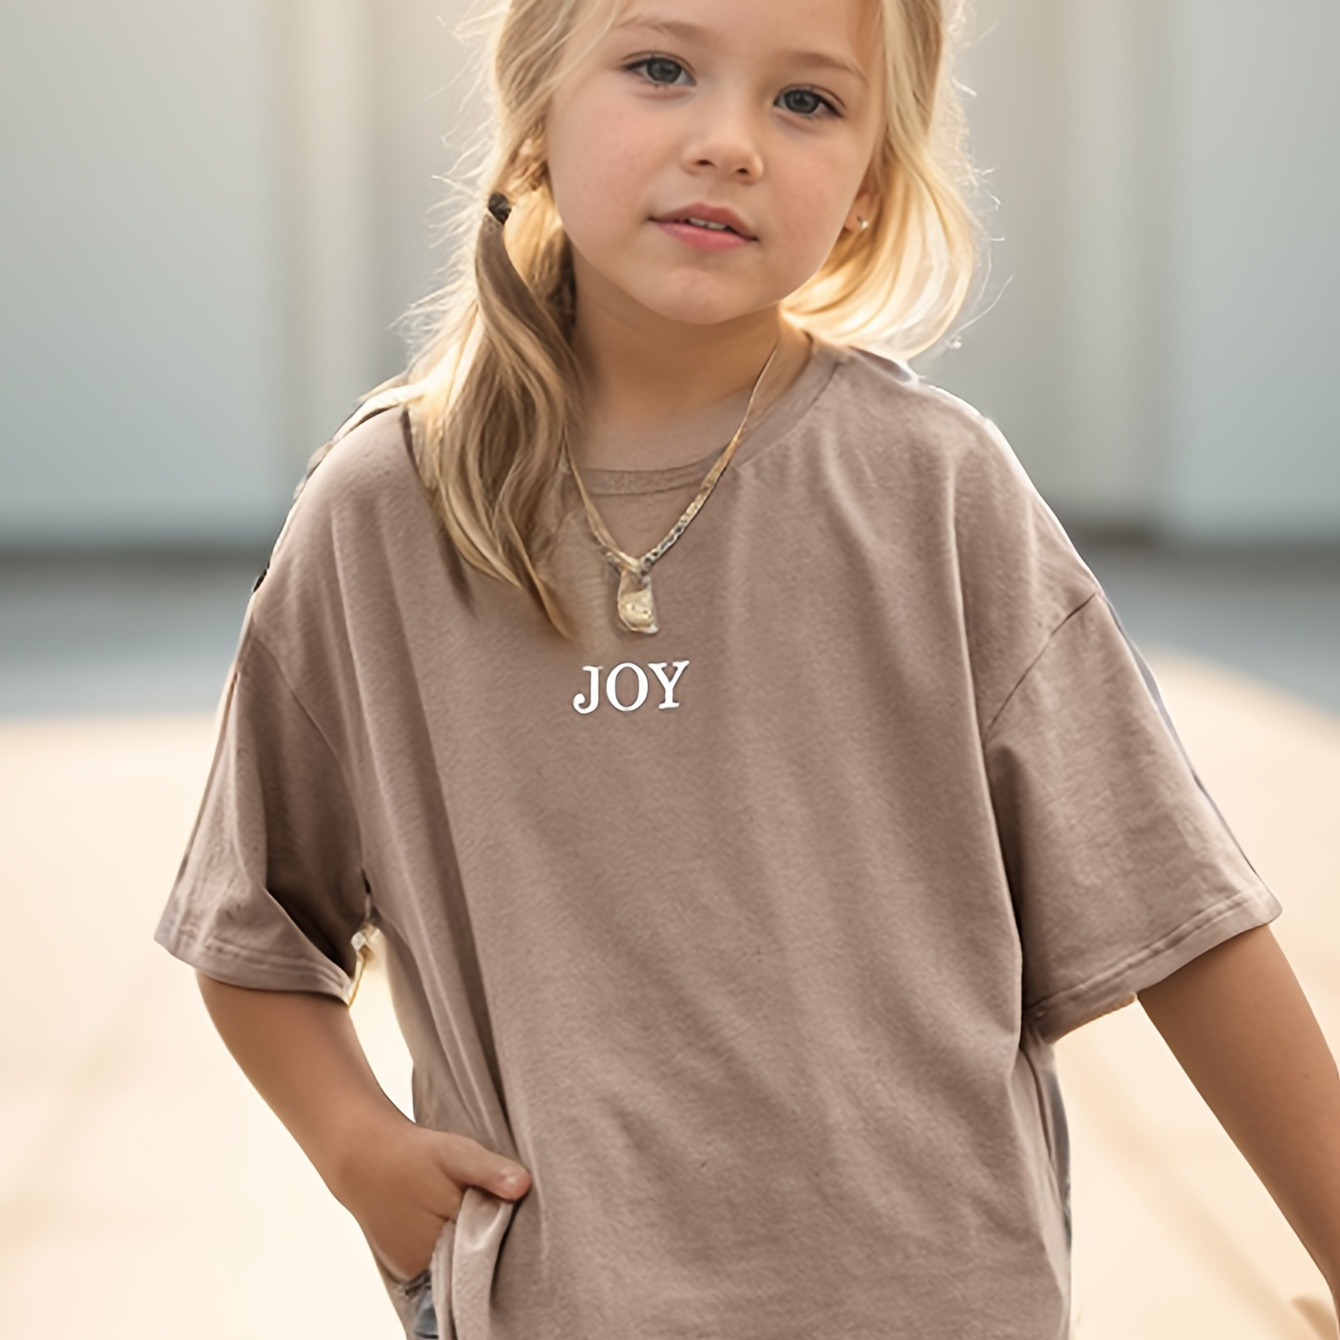 

Joy Print Solid Color Drop Shoulder Short Sleeve Crew Neck T-shirt, Casual Loose Fit Thin Tee Comfy Summer Tops, Girls' Clothing